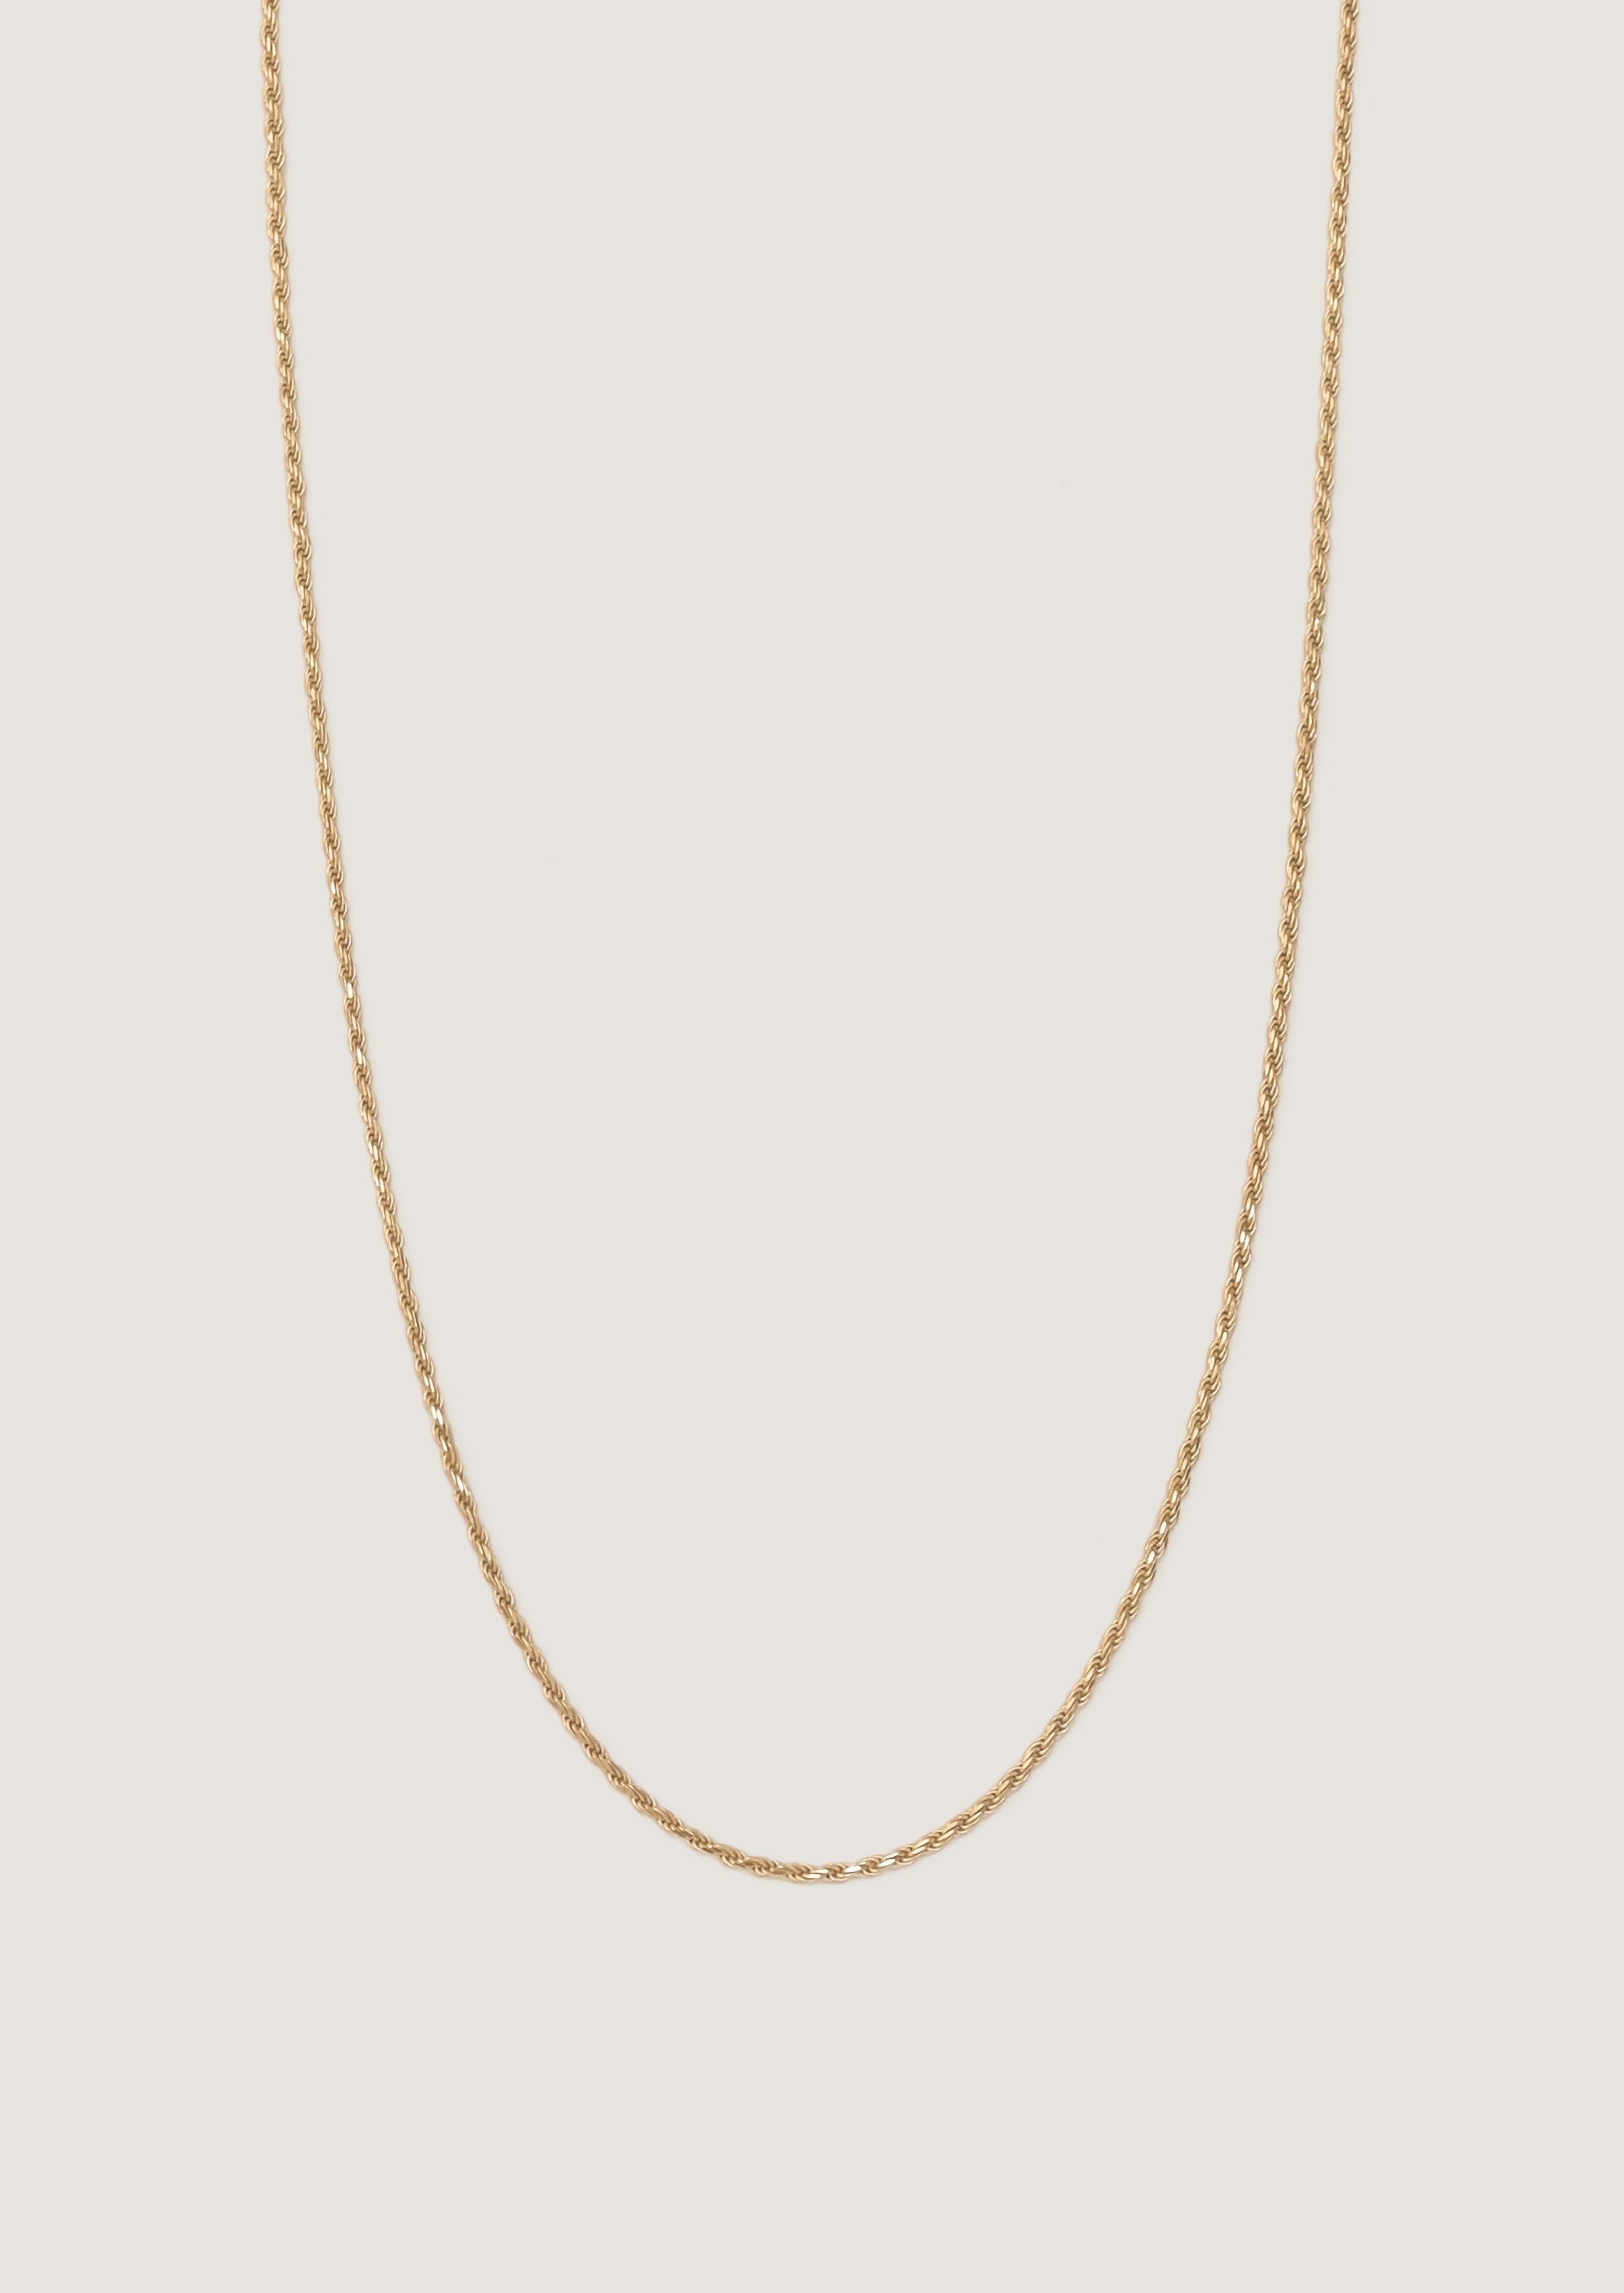 Petite Rope Chain Necklace - Kinn